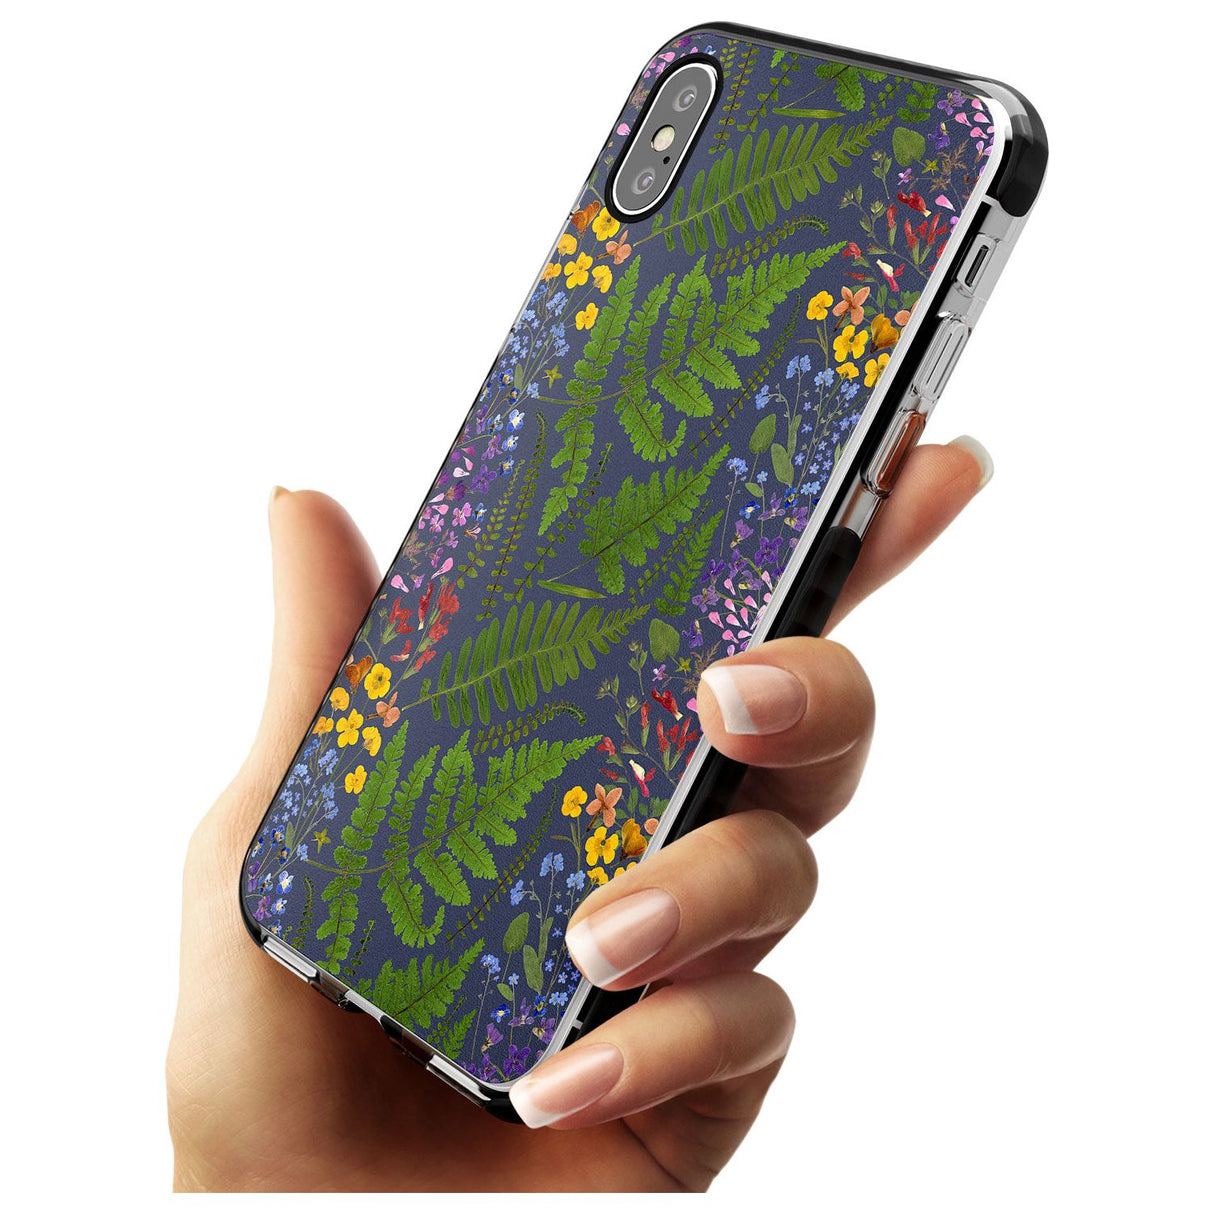 Busy Floral and Fern Design - Navy Black Impact Phone Case for iPhone X XS Max XR